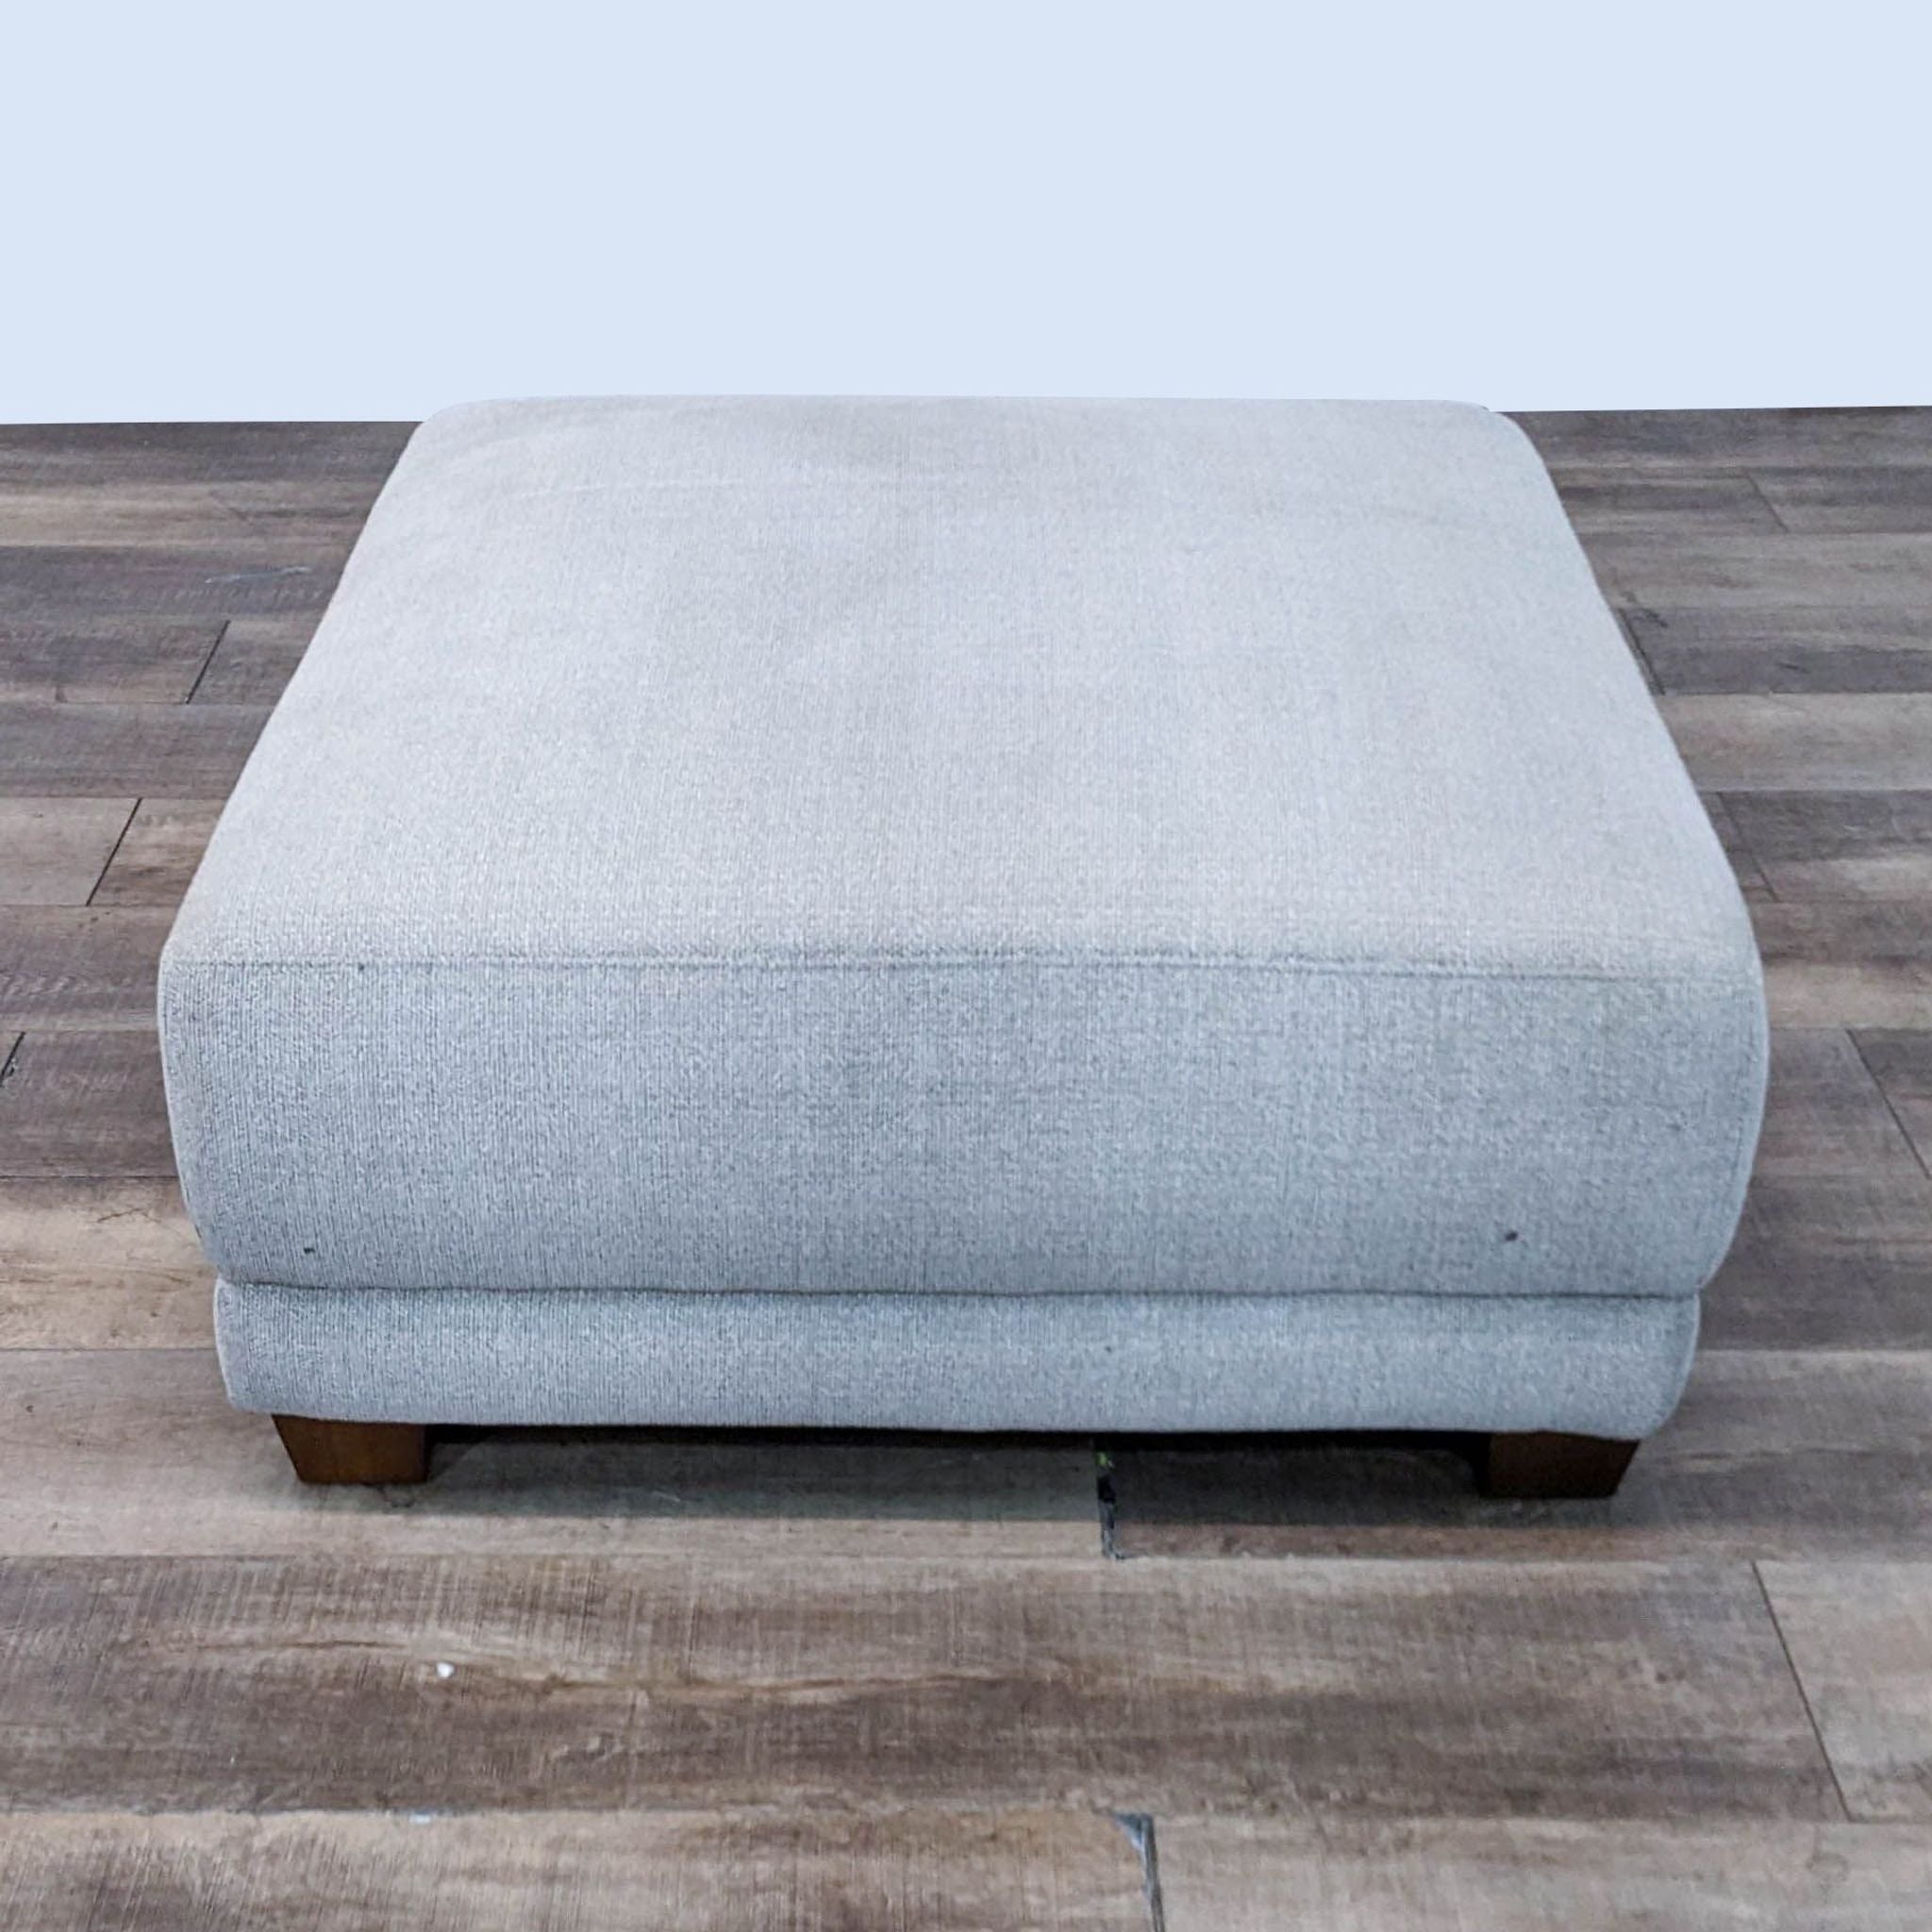 Alt text 1: A neutral-colored, square ottoman measuring 40 inches with dark-finished feet, by Costco, on a wooden floor.